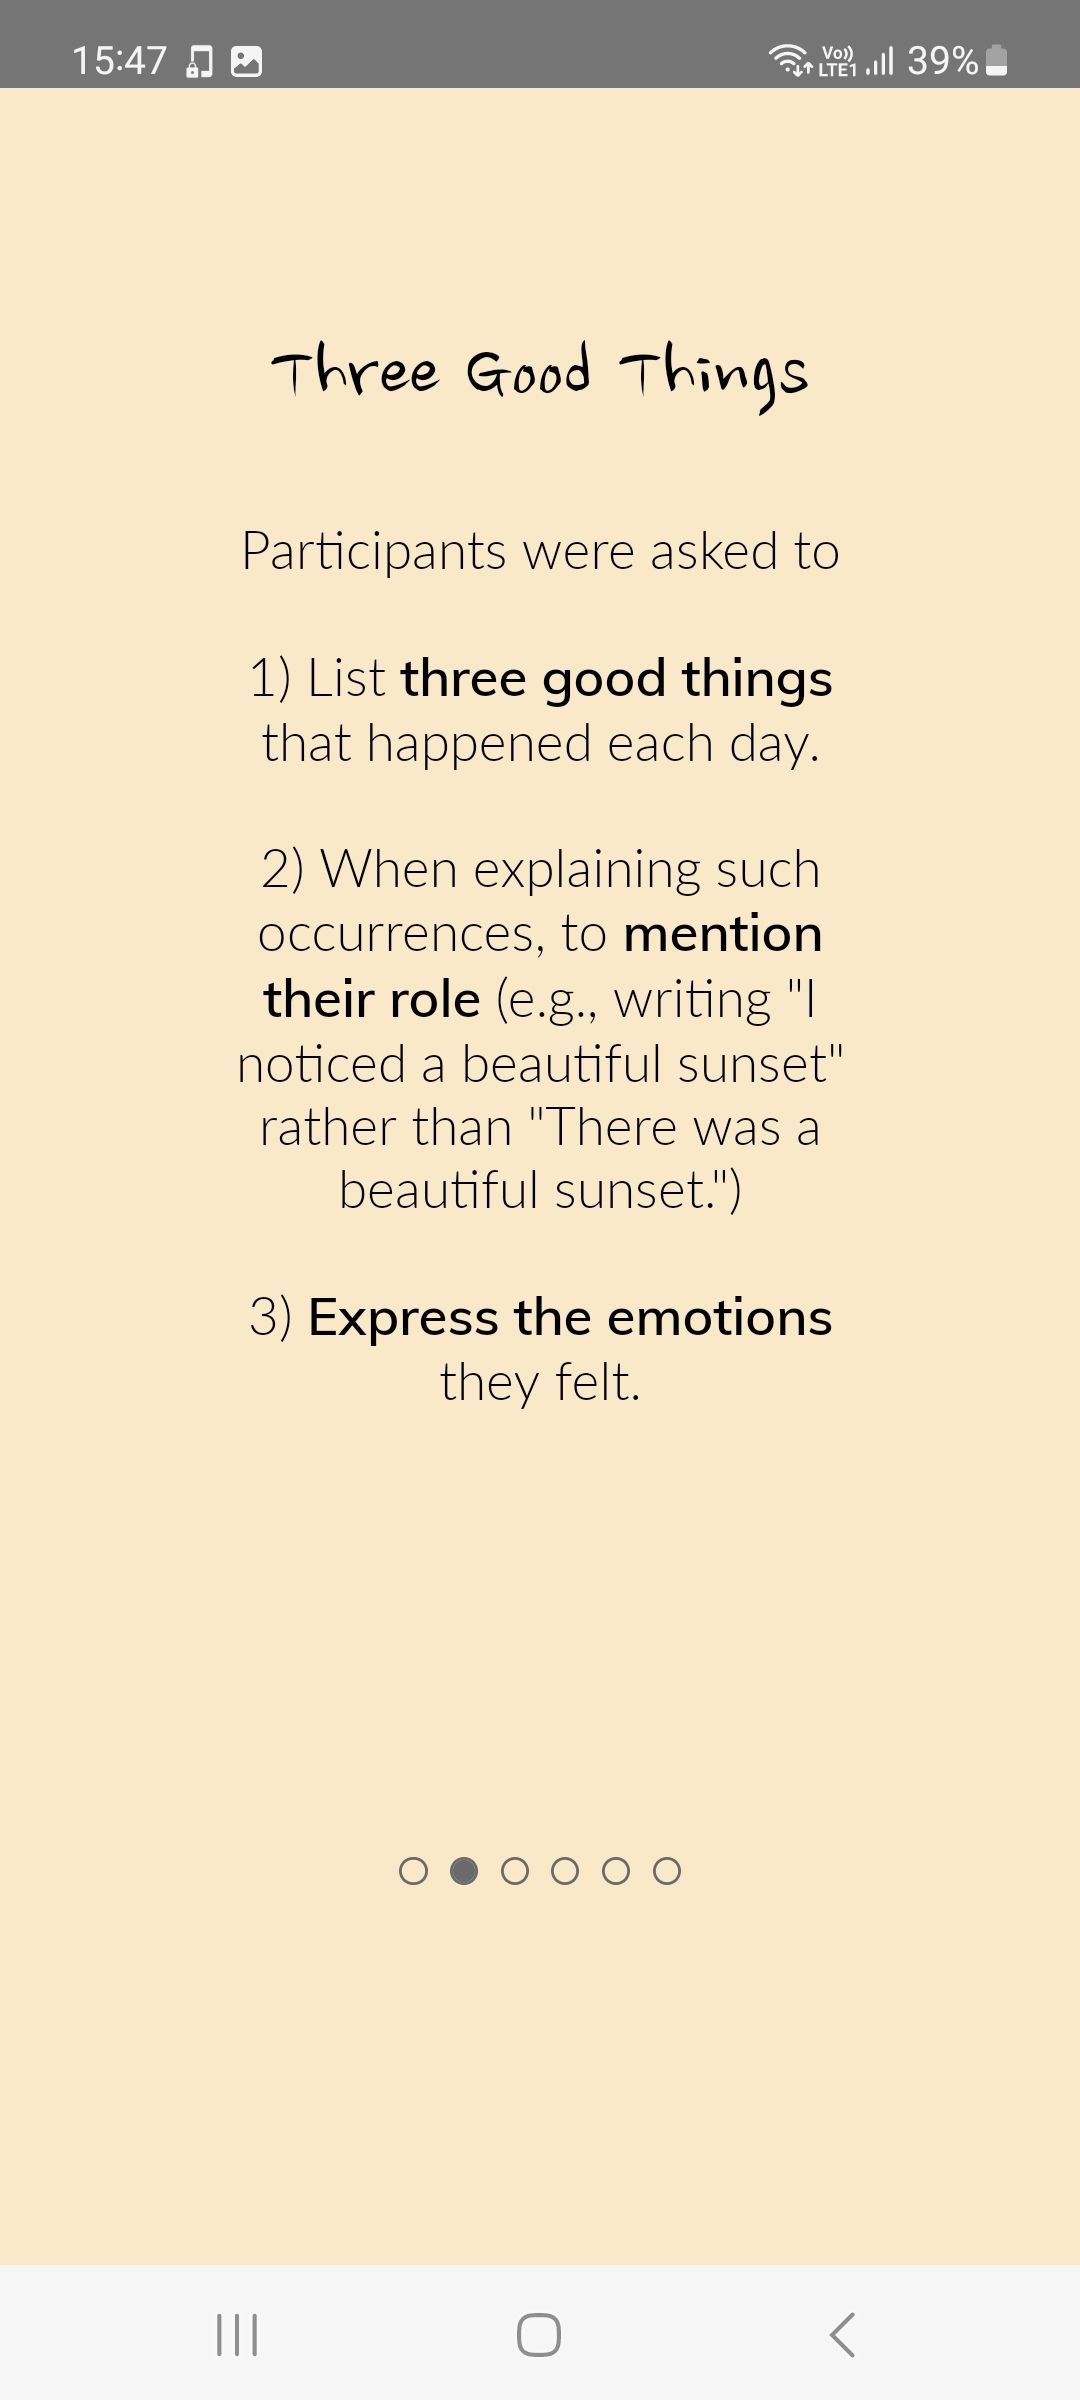 instructions in three good things app